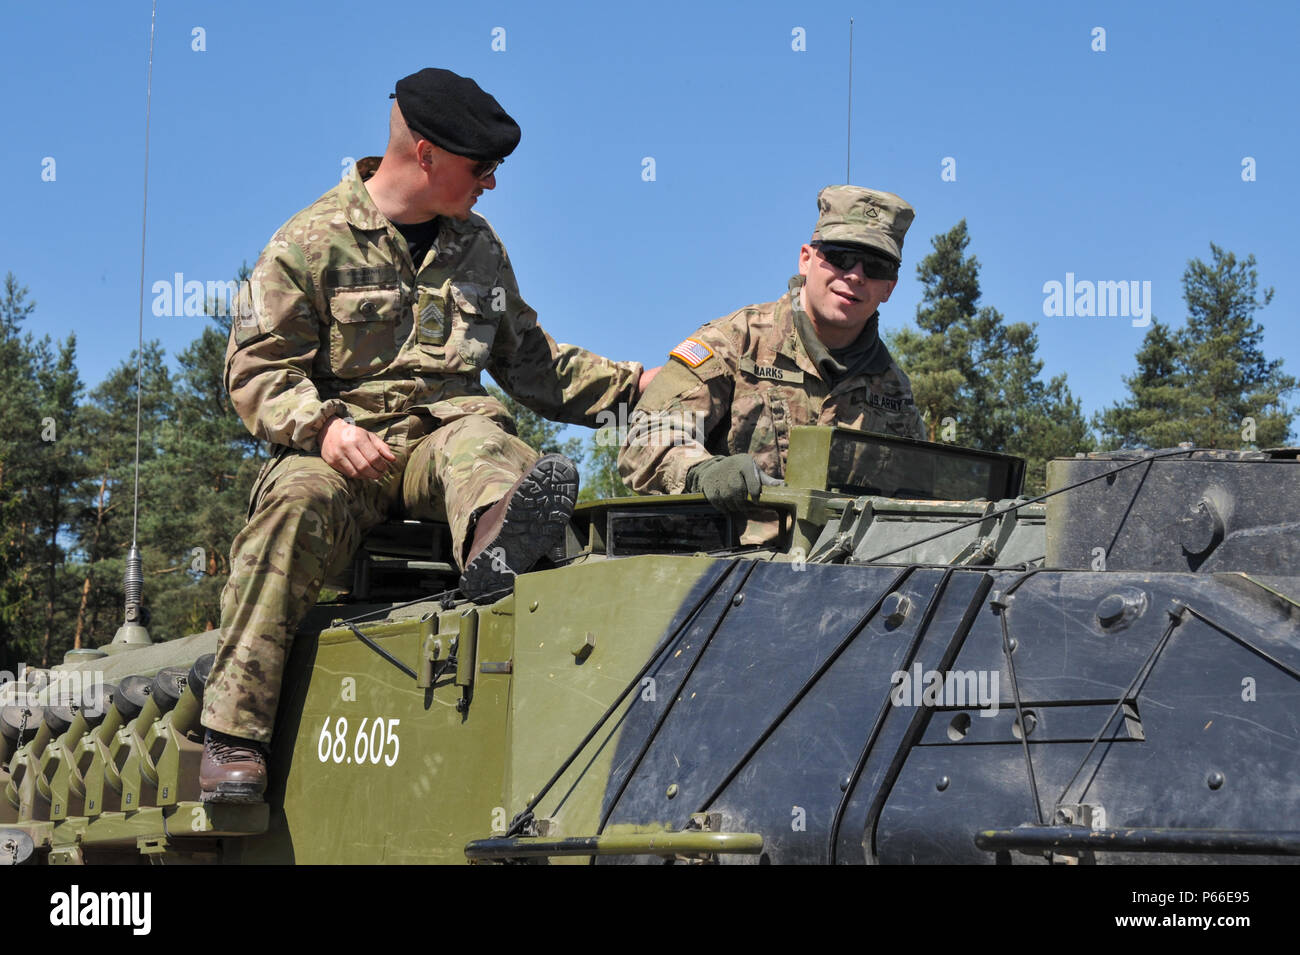 Soldiers from all nations participating in the Strong Europe Tank Challenge (SETC) inspect each others equiment May 08, 2016 at Grafenwoehr Training Area, Germany. The SETC is co-hosted by U.S. Army Europe and the German Bundeswehr May 10-13, 2016. The competition is designed to foster military partnership while promoting NATO interoperability. Seven platoons from six NATO nations are competing in SETC - the first multinational tank challenge at Grafenwoehr in 25 years. For more photos, videos and stories from the Strong Europe Tank Challenge, go to http://www.eur.army.mil/tankchallenge/ (U.S. Stock Photo